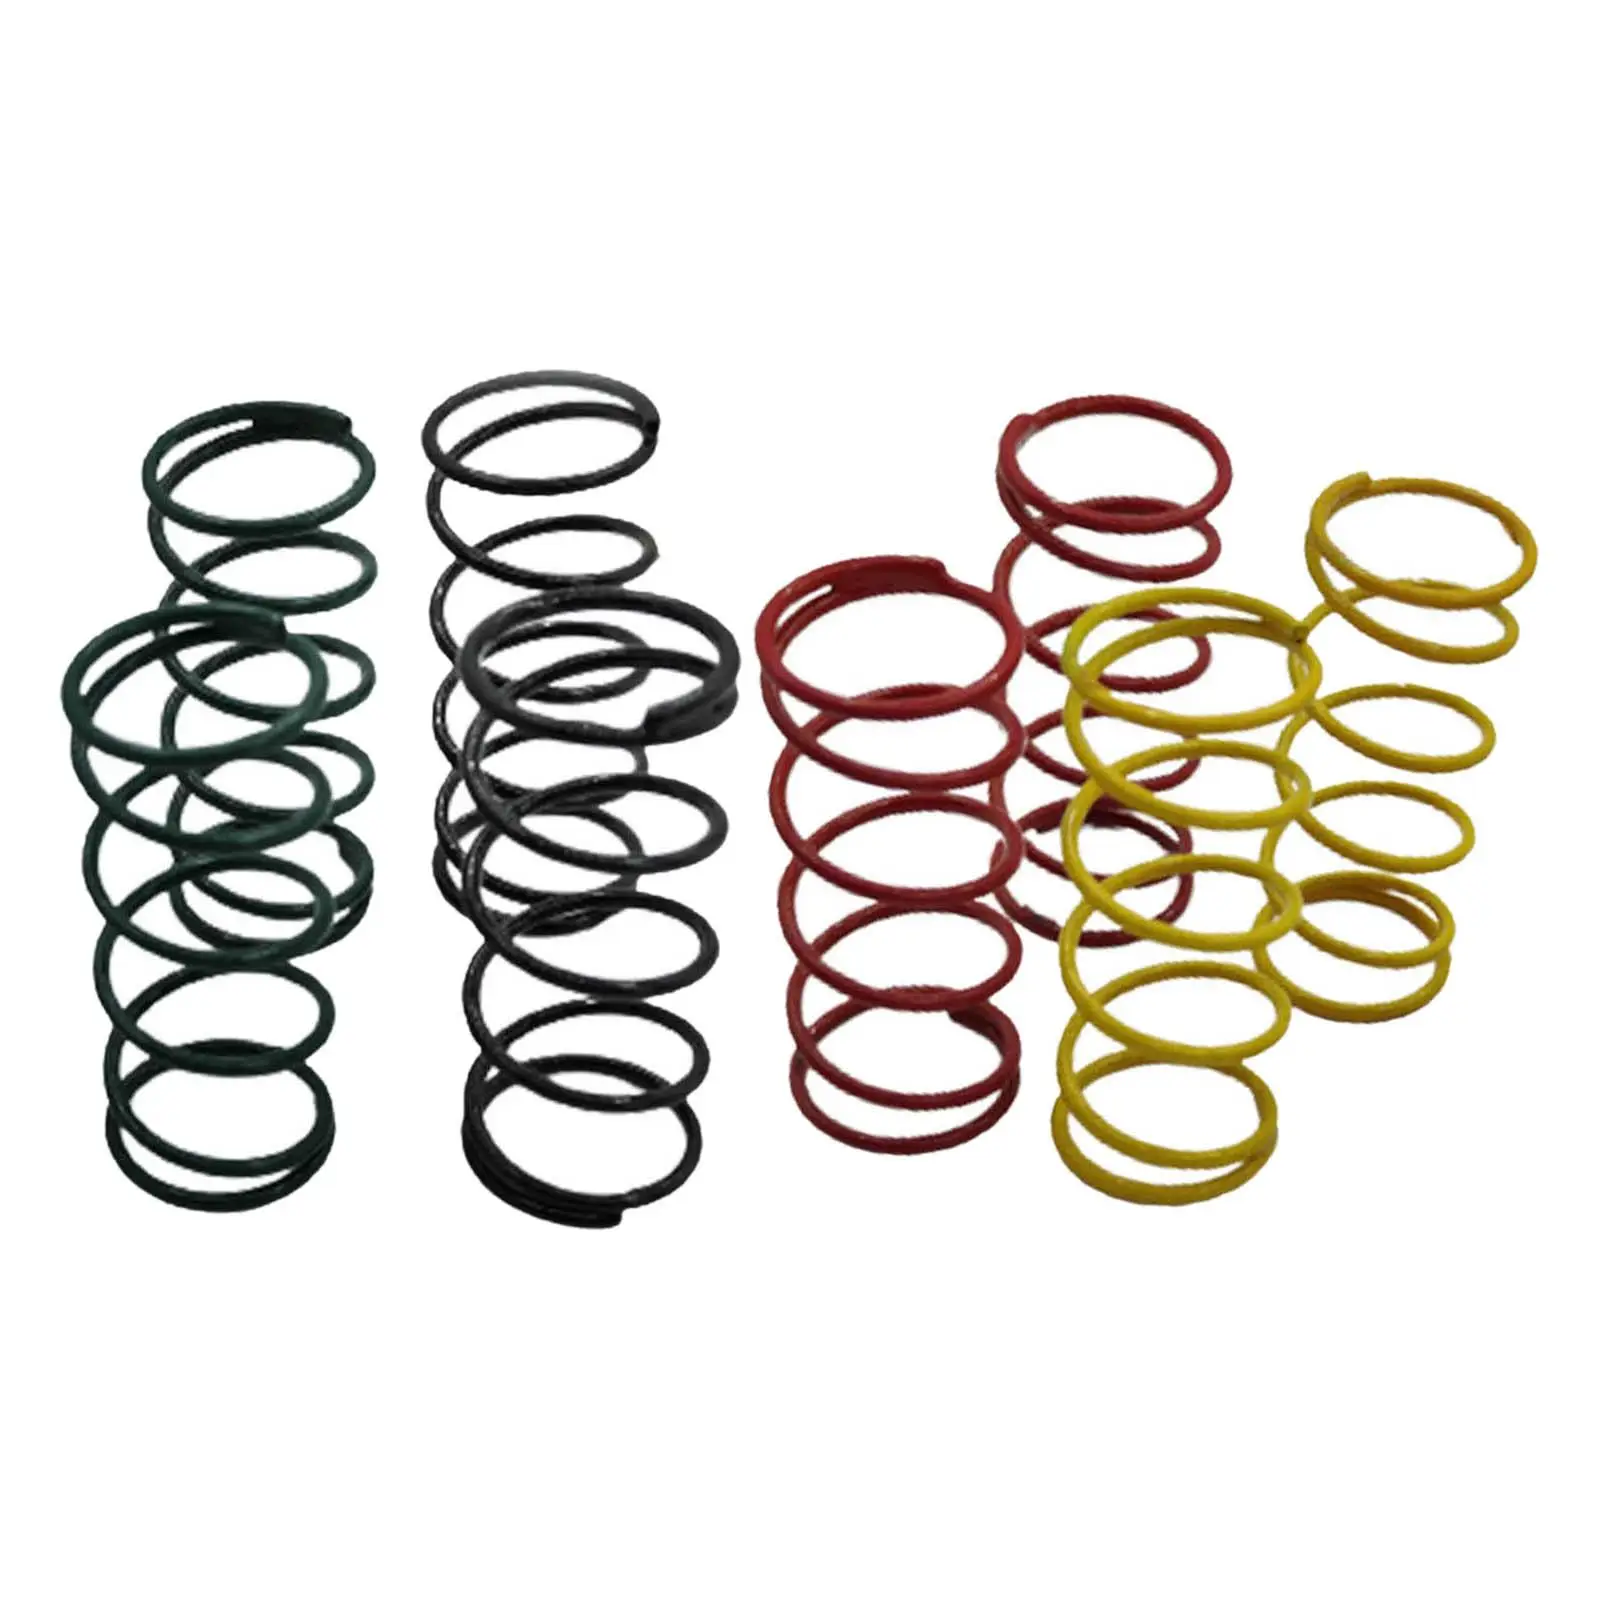 8x Big Bore Shock Spring Set 80mm Iron Car Shock Springs for RC Vehicles for Traxxas Truck